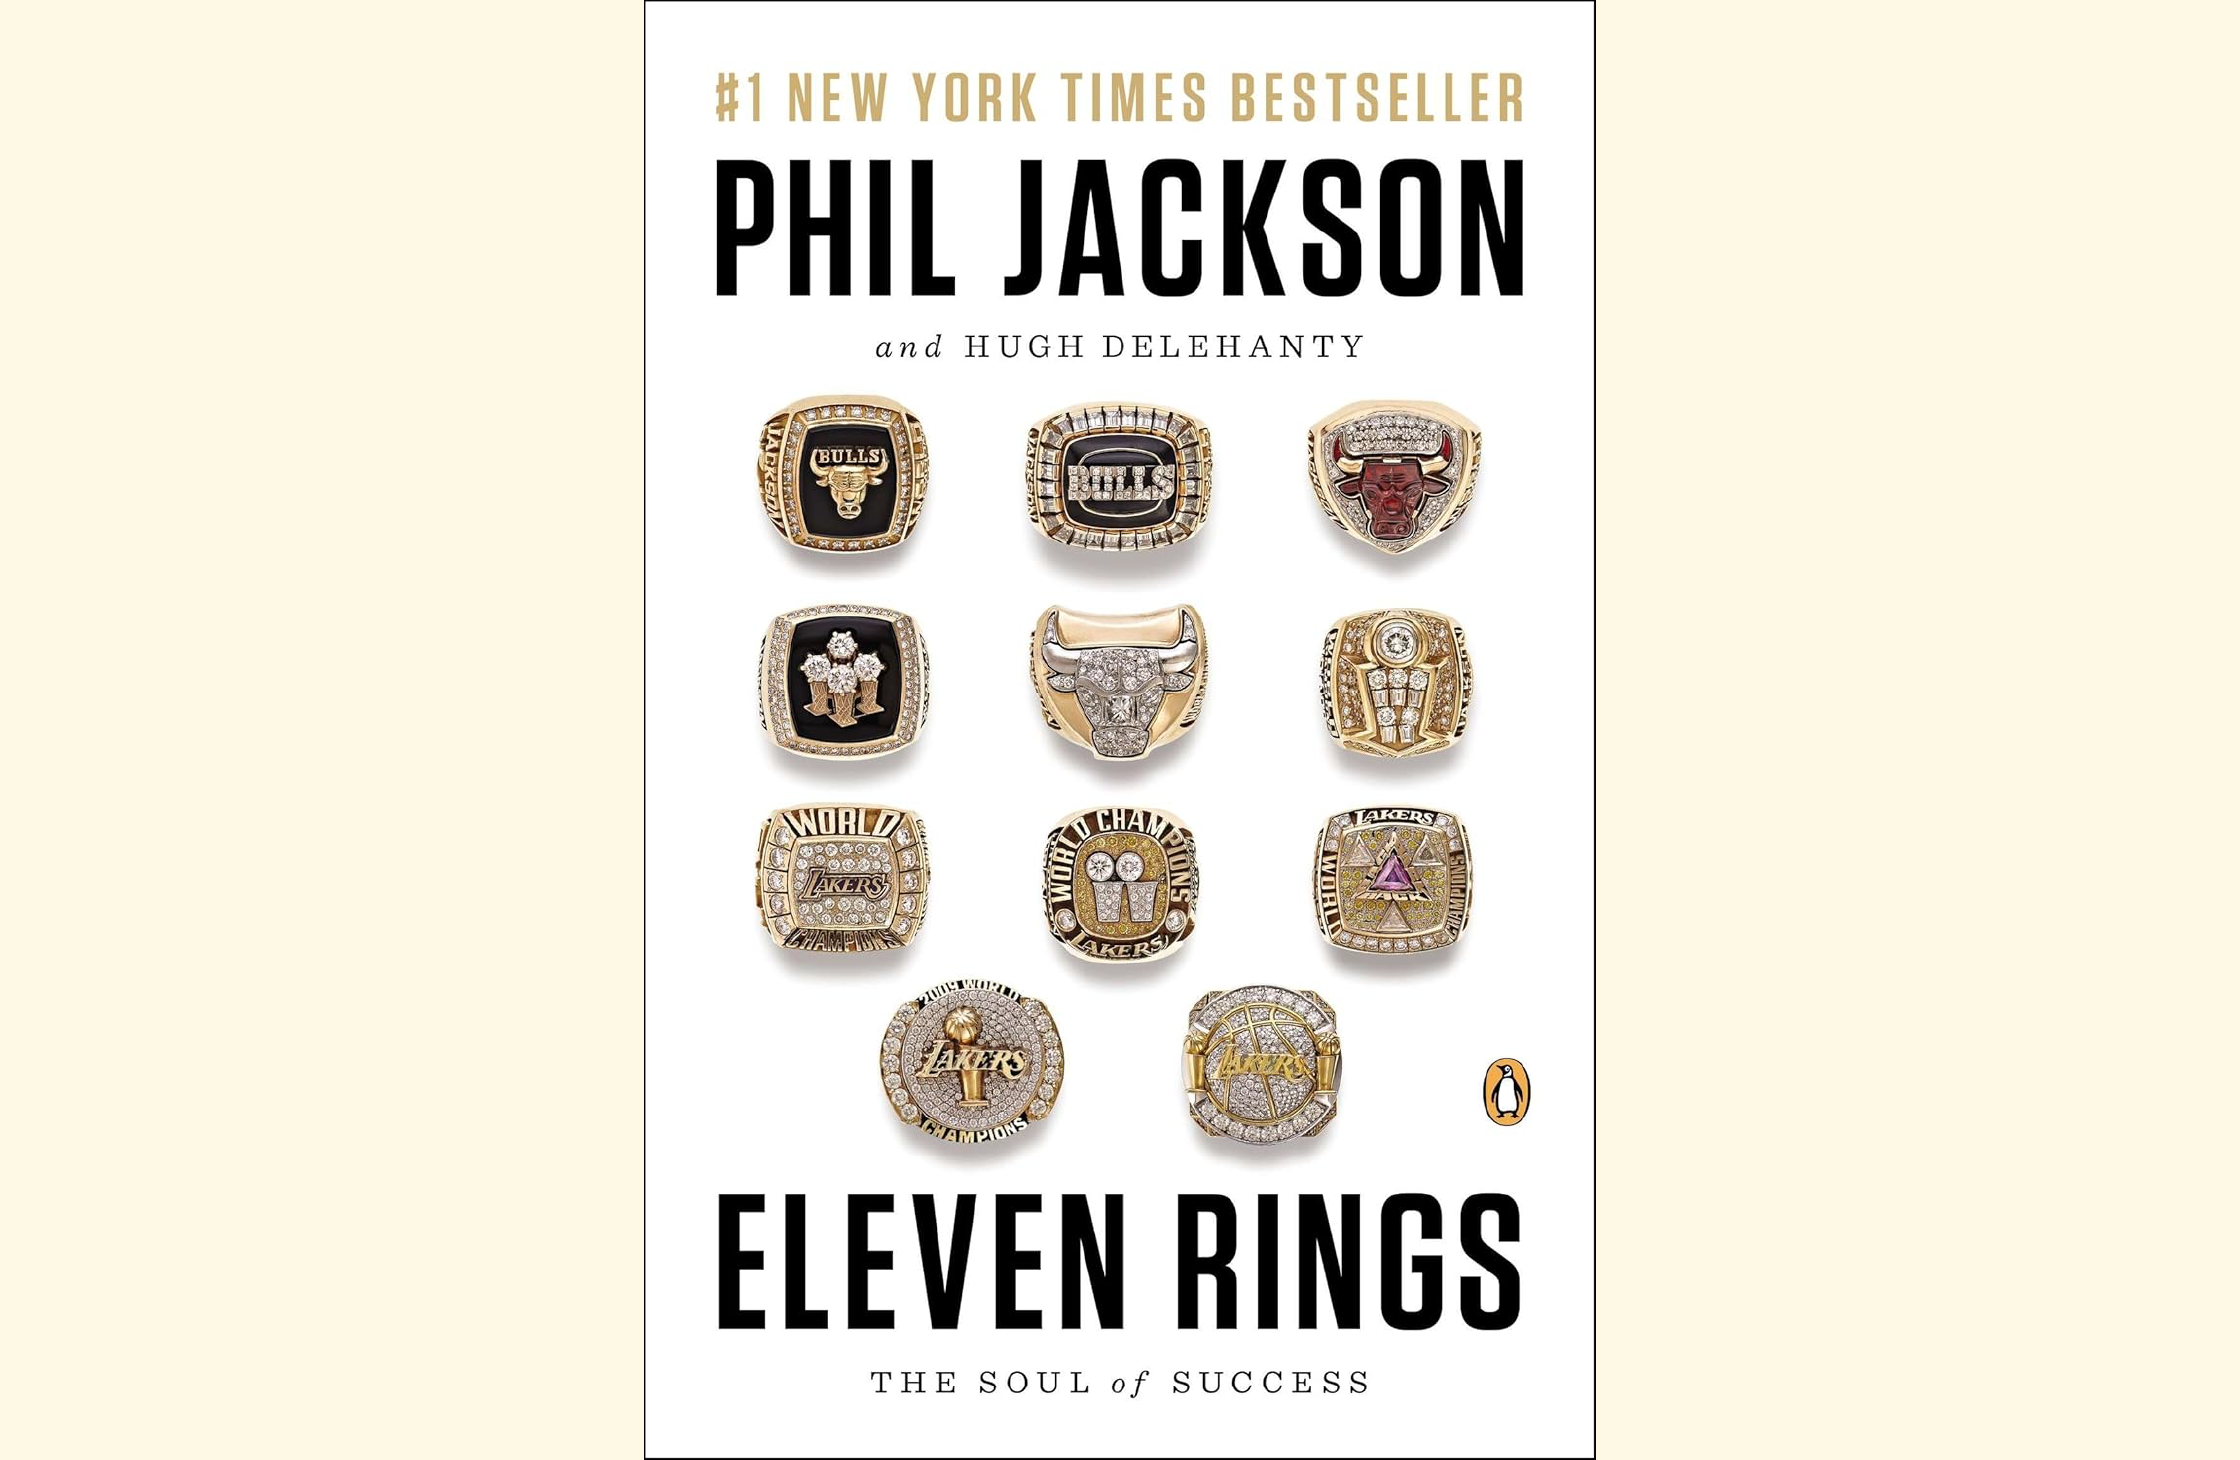 Summary: Eleven Rings by Phil Jackson